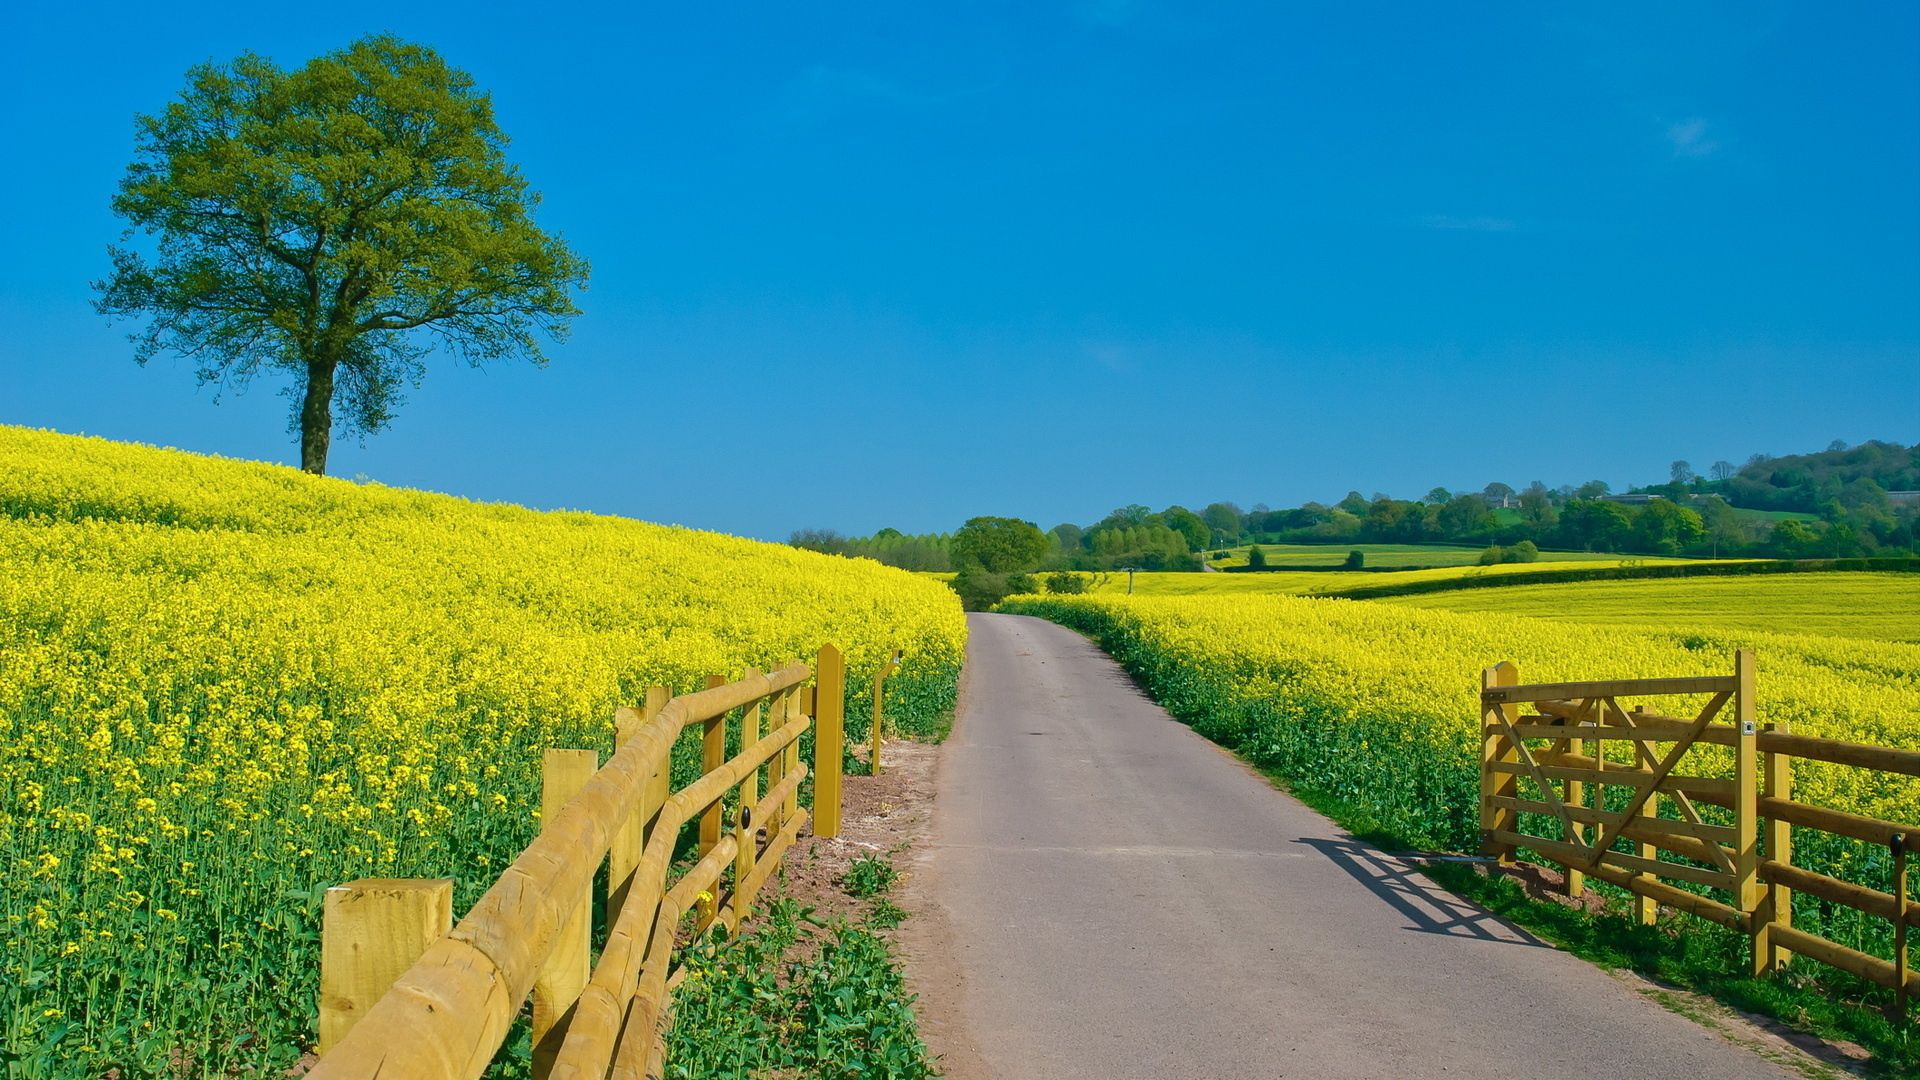 road, open spaces, summer, expanse, flowers, slopes, yellow, nature, fencing, enclosure, day phone background